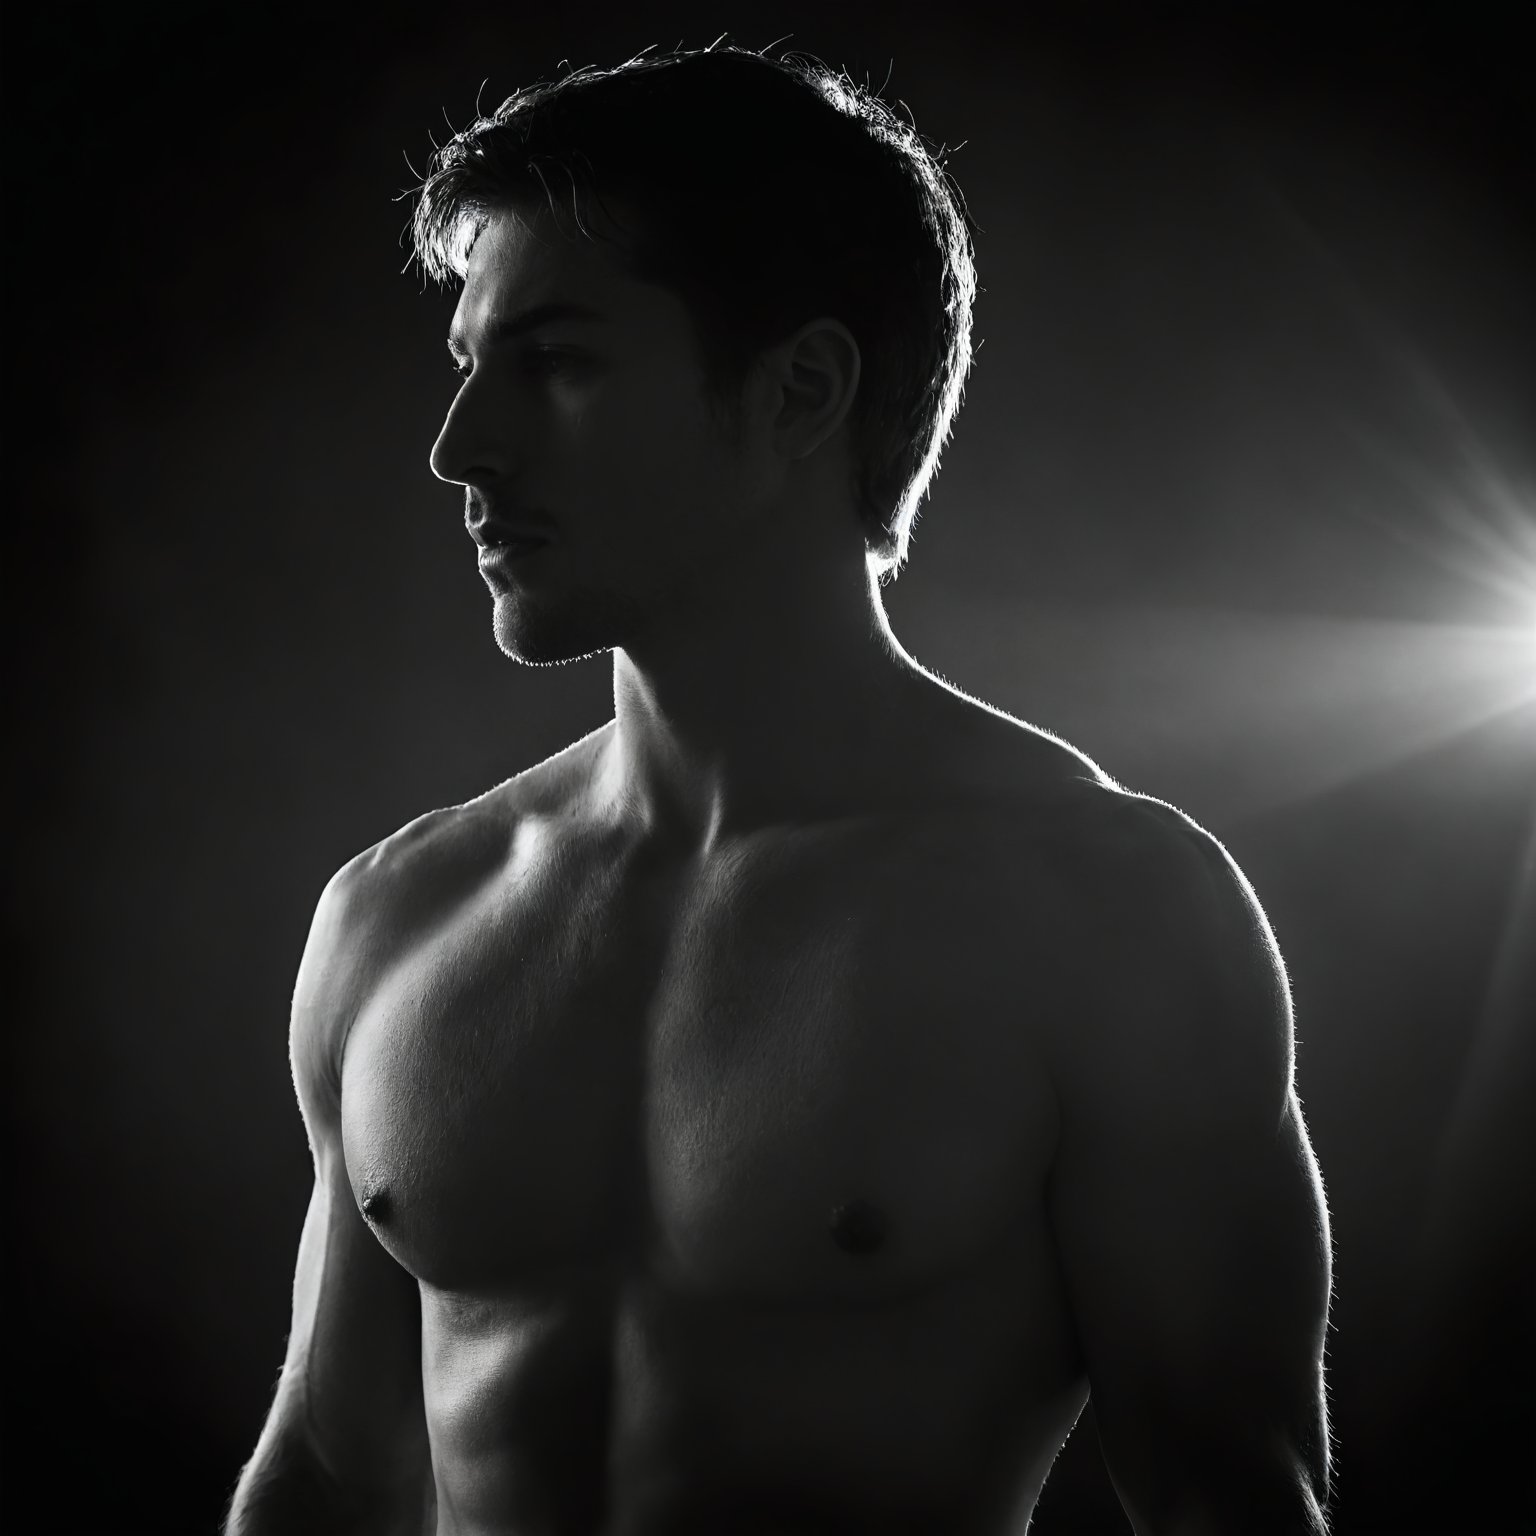 Establishing Shot. RAW Photo. Alluring & Beautiful, muscular male Model. Studio Photography. (Backlit:1.8), film grain, Backlit silhouette,male figure, mysterious, high contrast, black and white, anonymous, moody, circle of light background, studio shot, unrecognisable person, dramatic lighting, minimalistic, entered composition, portrait orientation, dark edges, rim lighting effect, obscured features, human outline